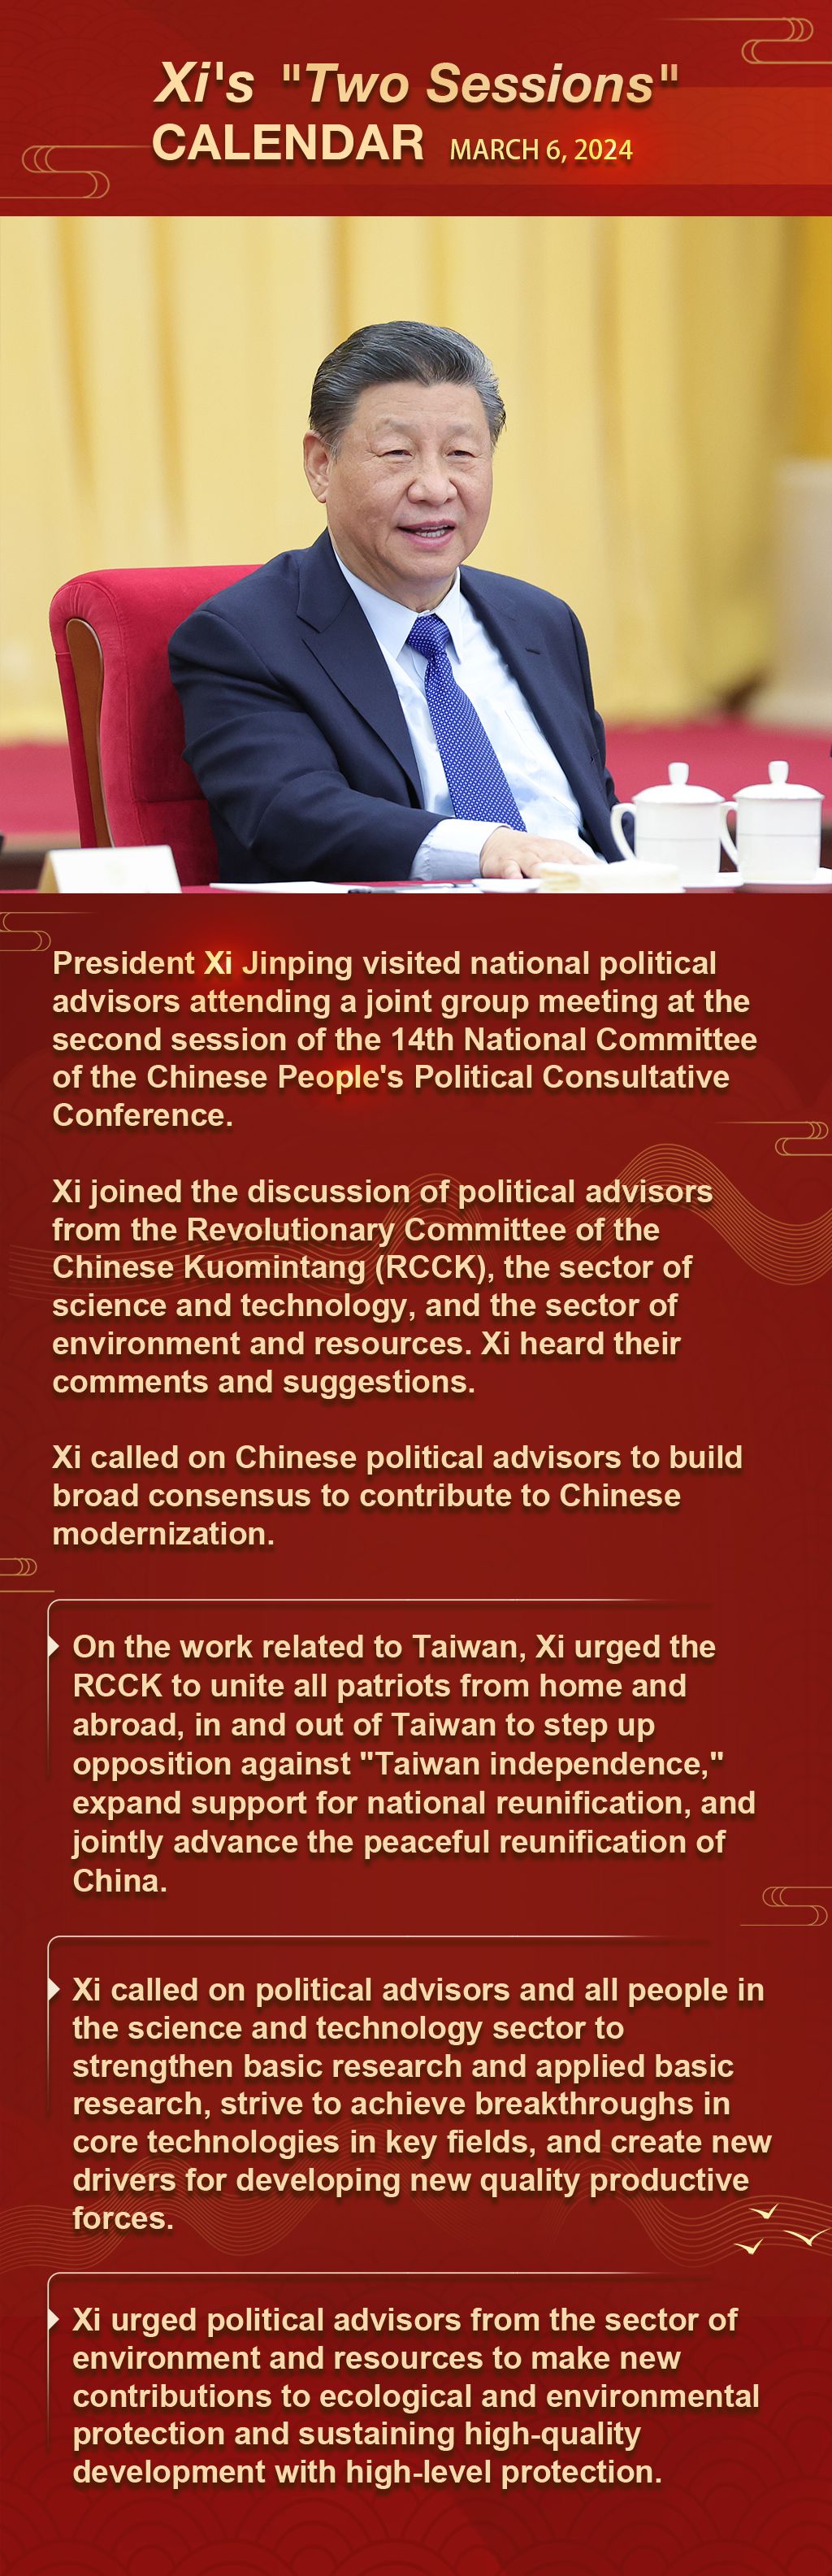 Xi's "Two Sessions" Calendar: Xi visits political advisors, joins discussion at annual session